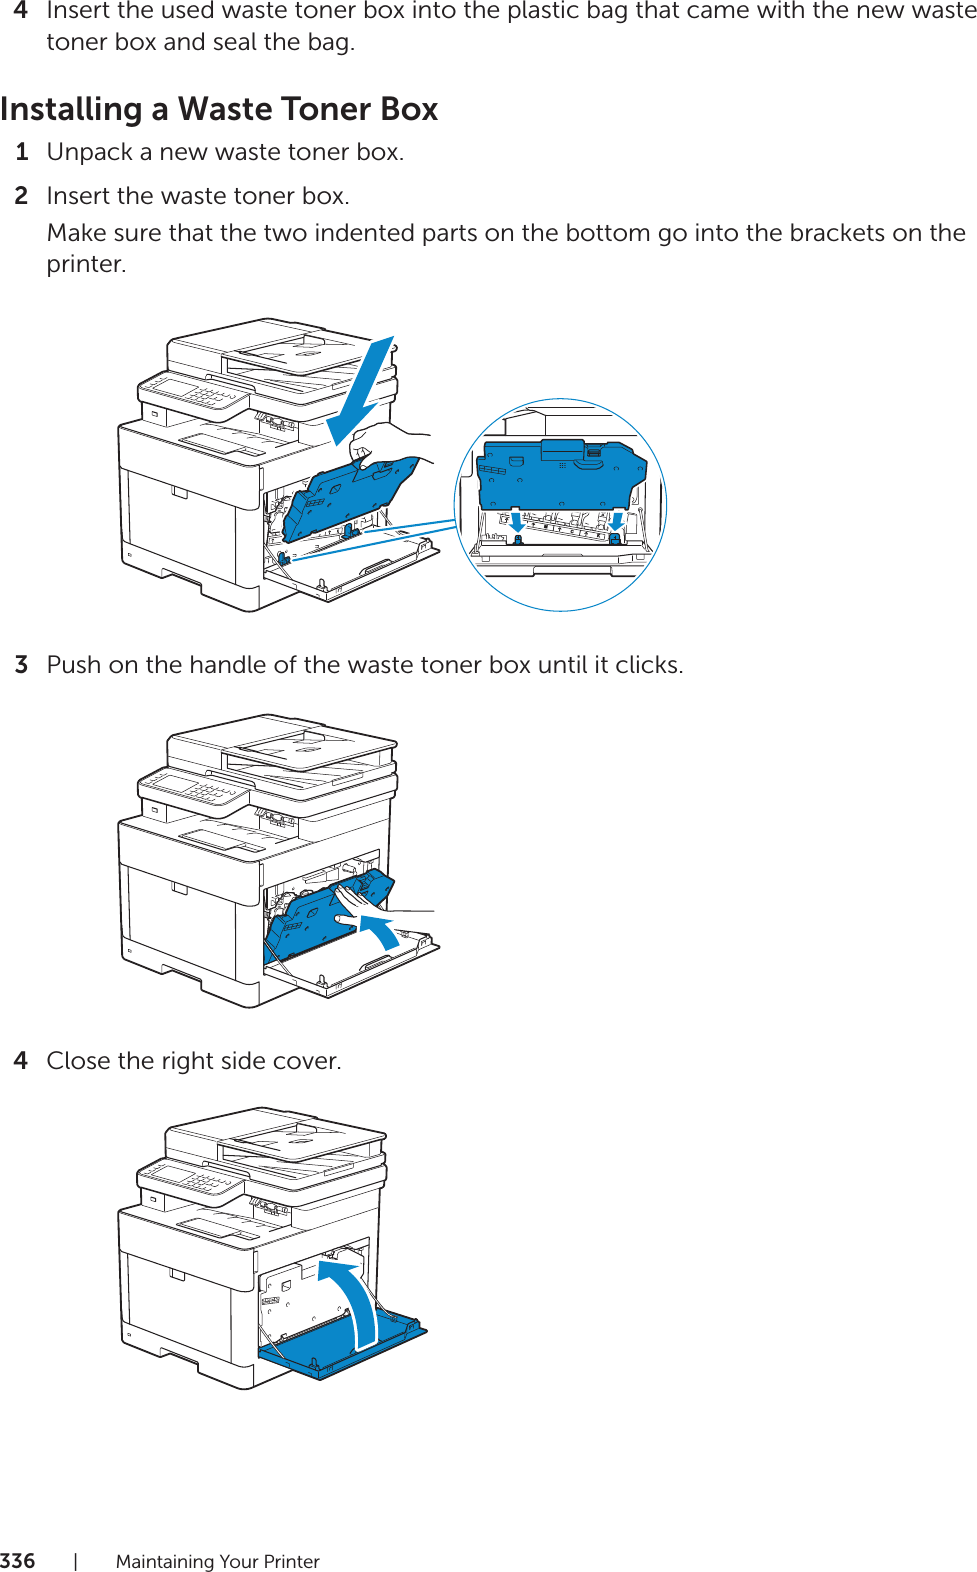 336| Maintaining Your Printer4Insert the used waste toner box into the plastic bag that came with the new waste toner box and seal the bag.Installing a Waste Toner Box1Unpack a new waste toner box.2Insert the waste toner box.Make sure that the two indented parts on the bottom go into the brackets on the printer.3Push on the handle of the waste toner box until it clicks.4Close the right side cover.YMCK